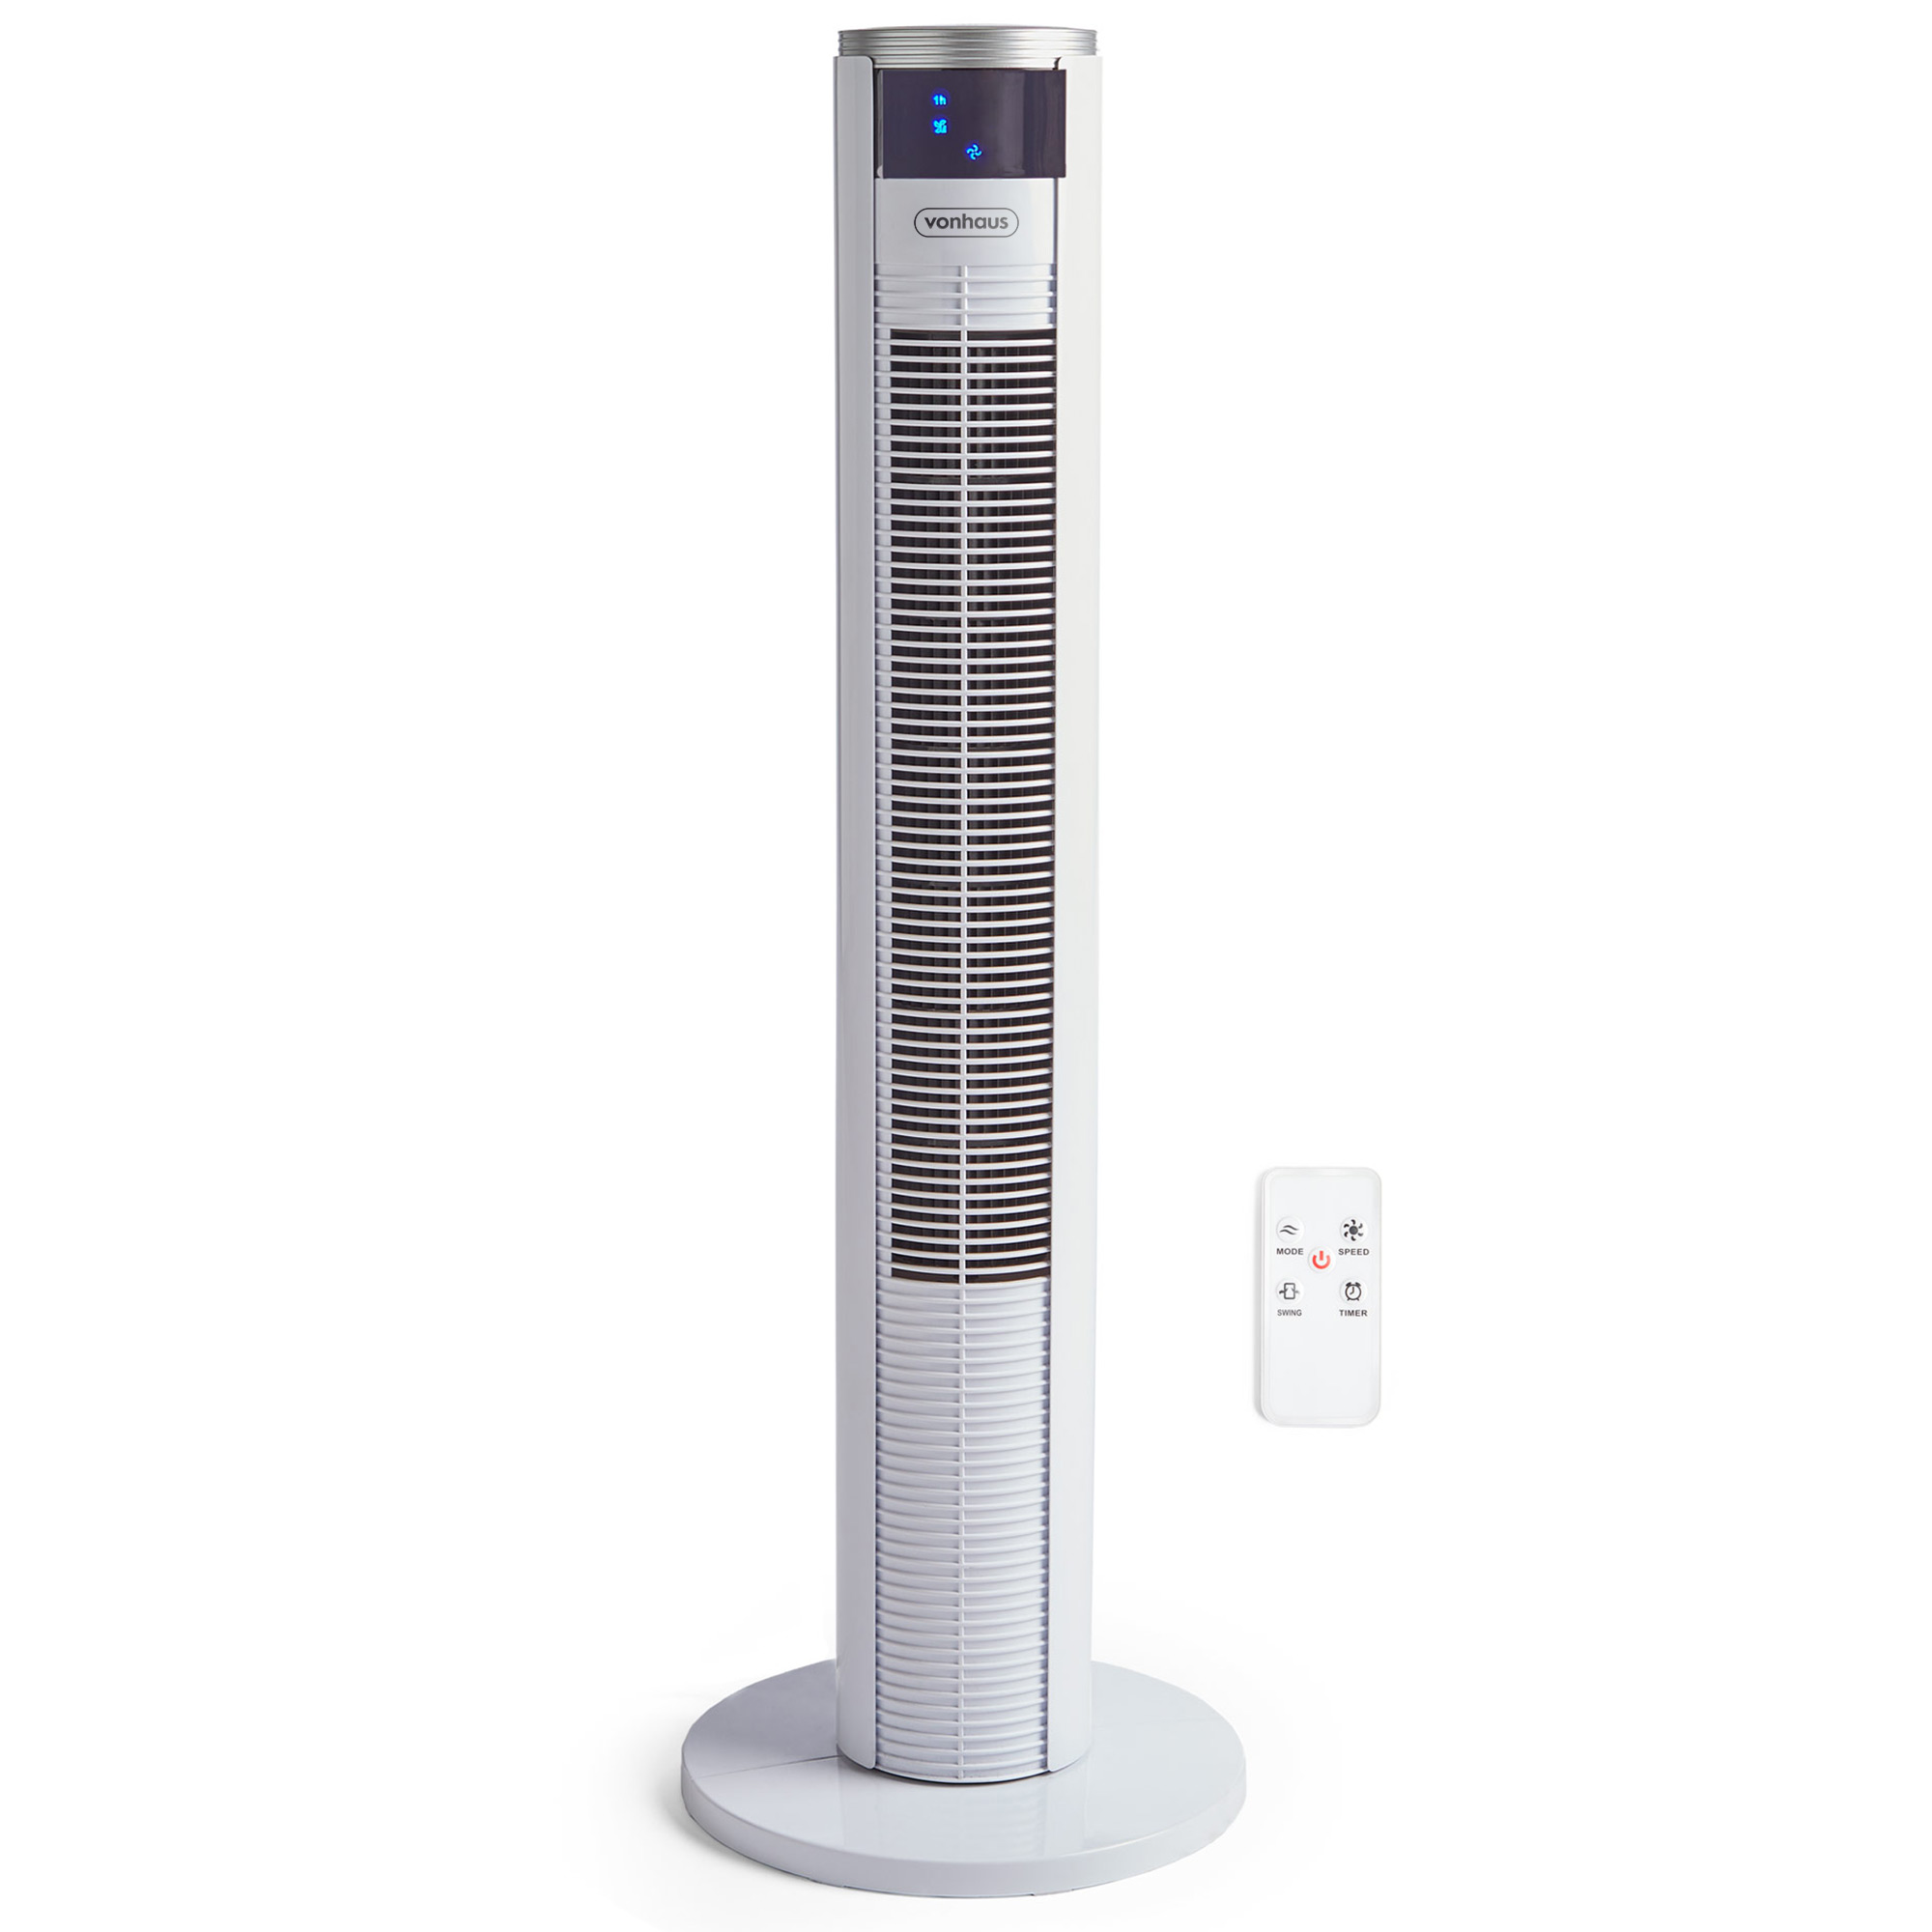 VonHaus Tower Fan - 35” Standing Cooling Fan for Home/Office with Remote Control